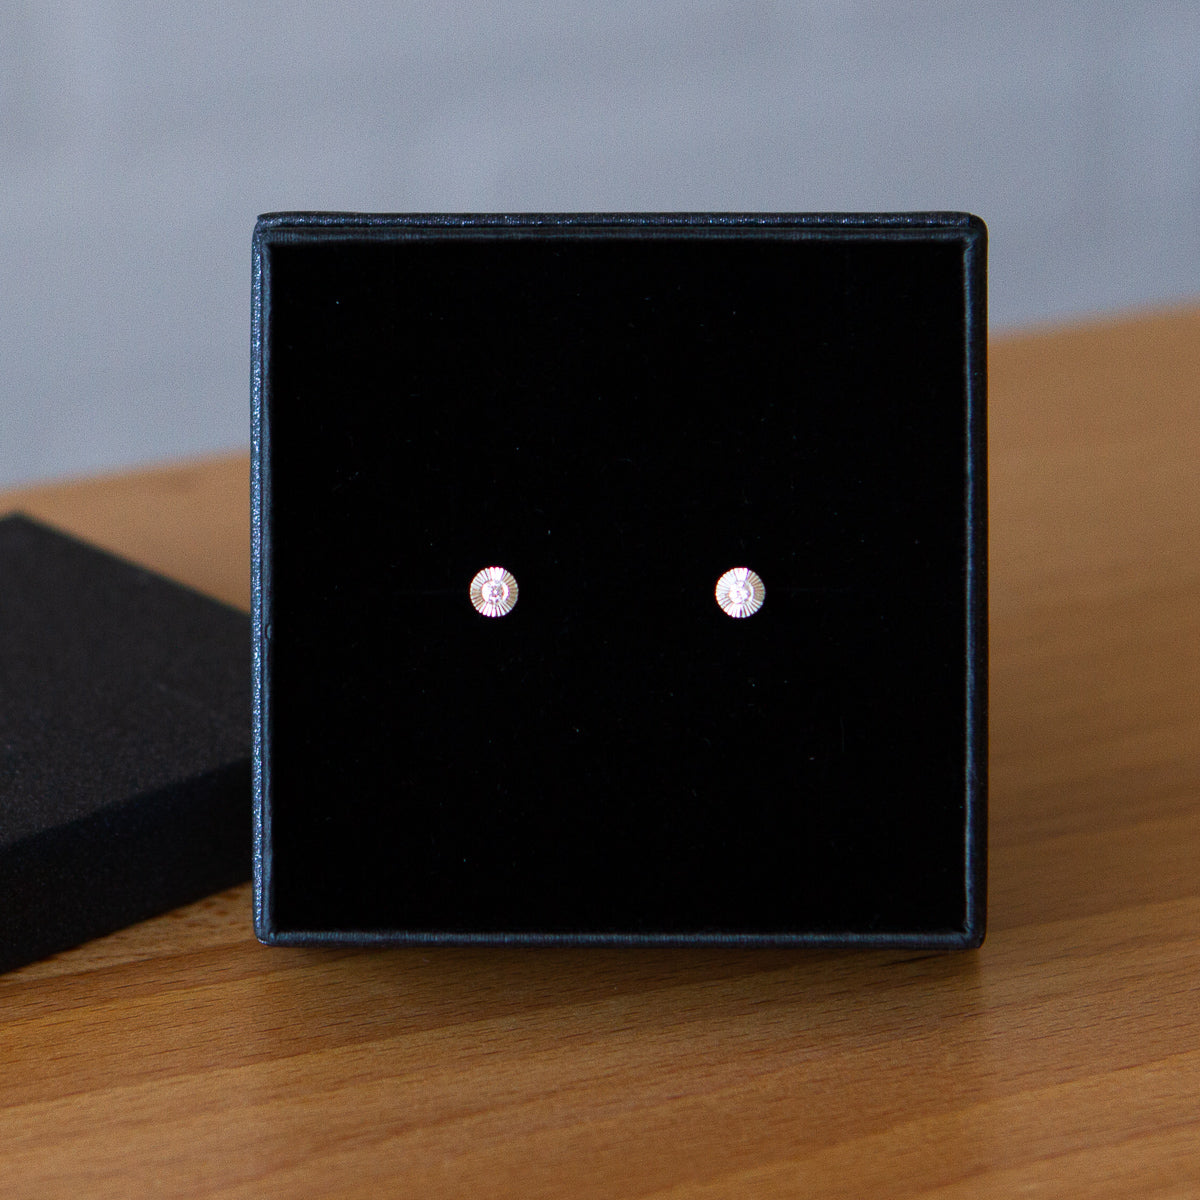 Sterling silver small engraved Aurora stud earrings with white diamond centers in a gift box